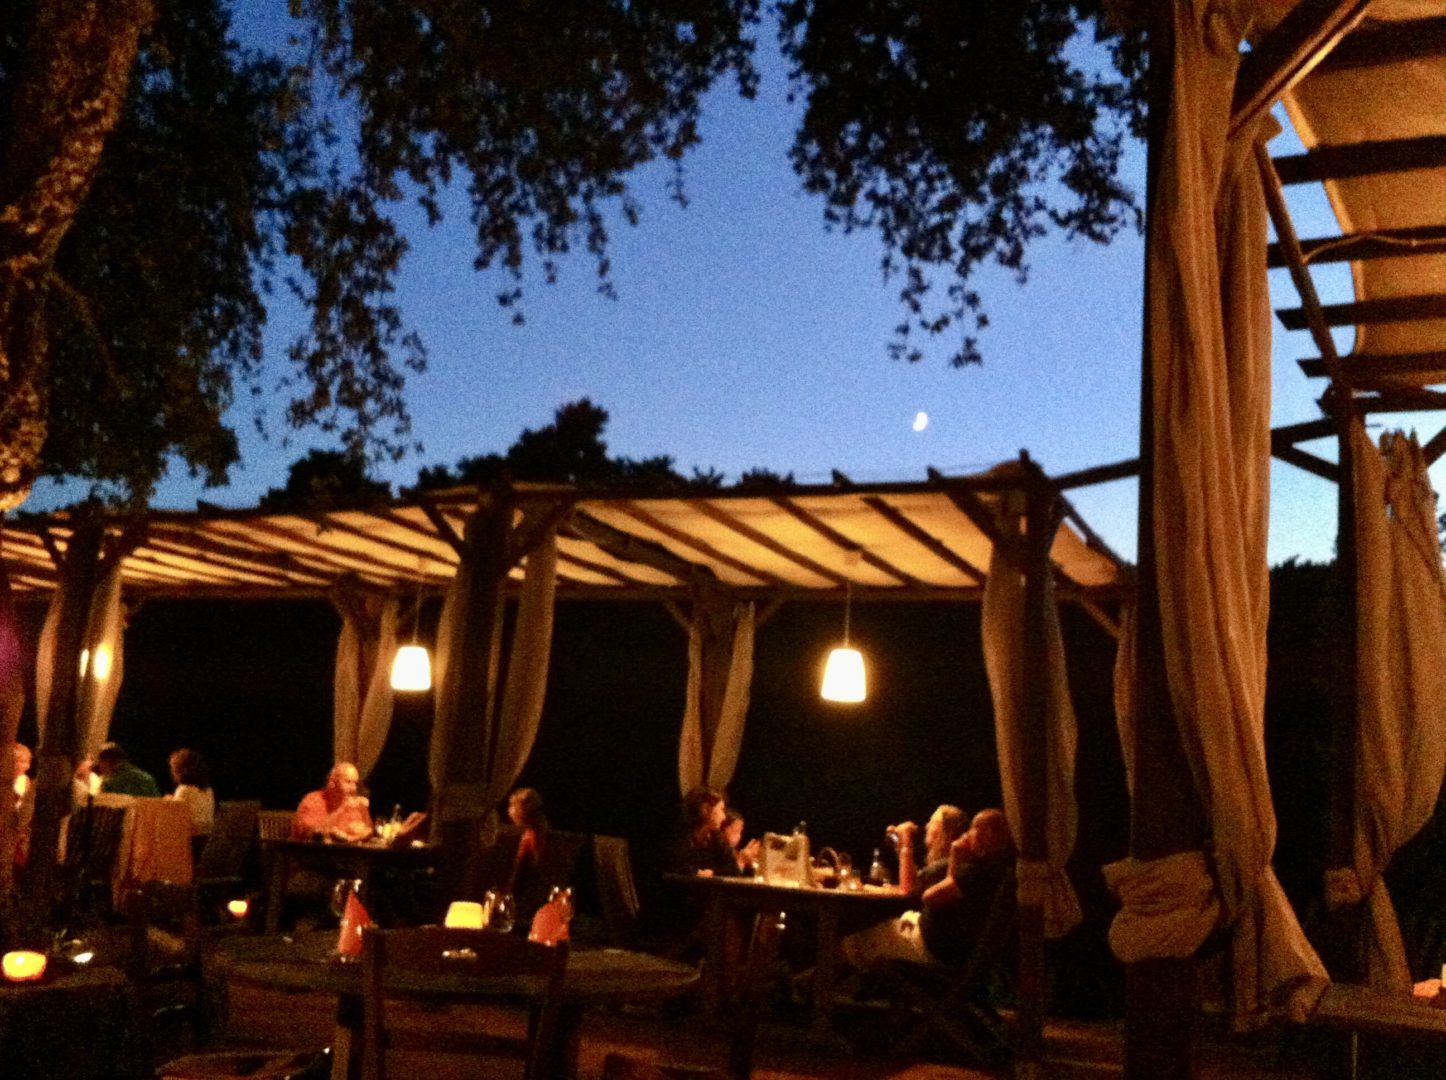 Evening outdoor dining at La Frere restaurant in Corsica